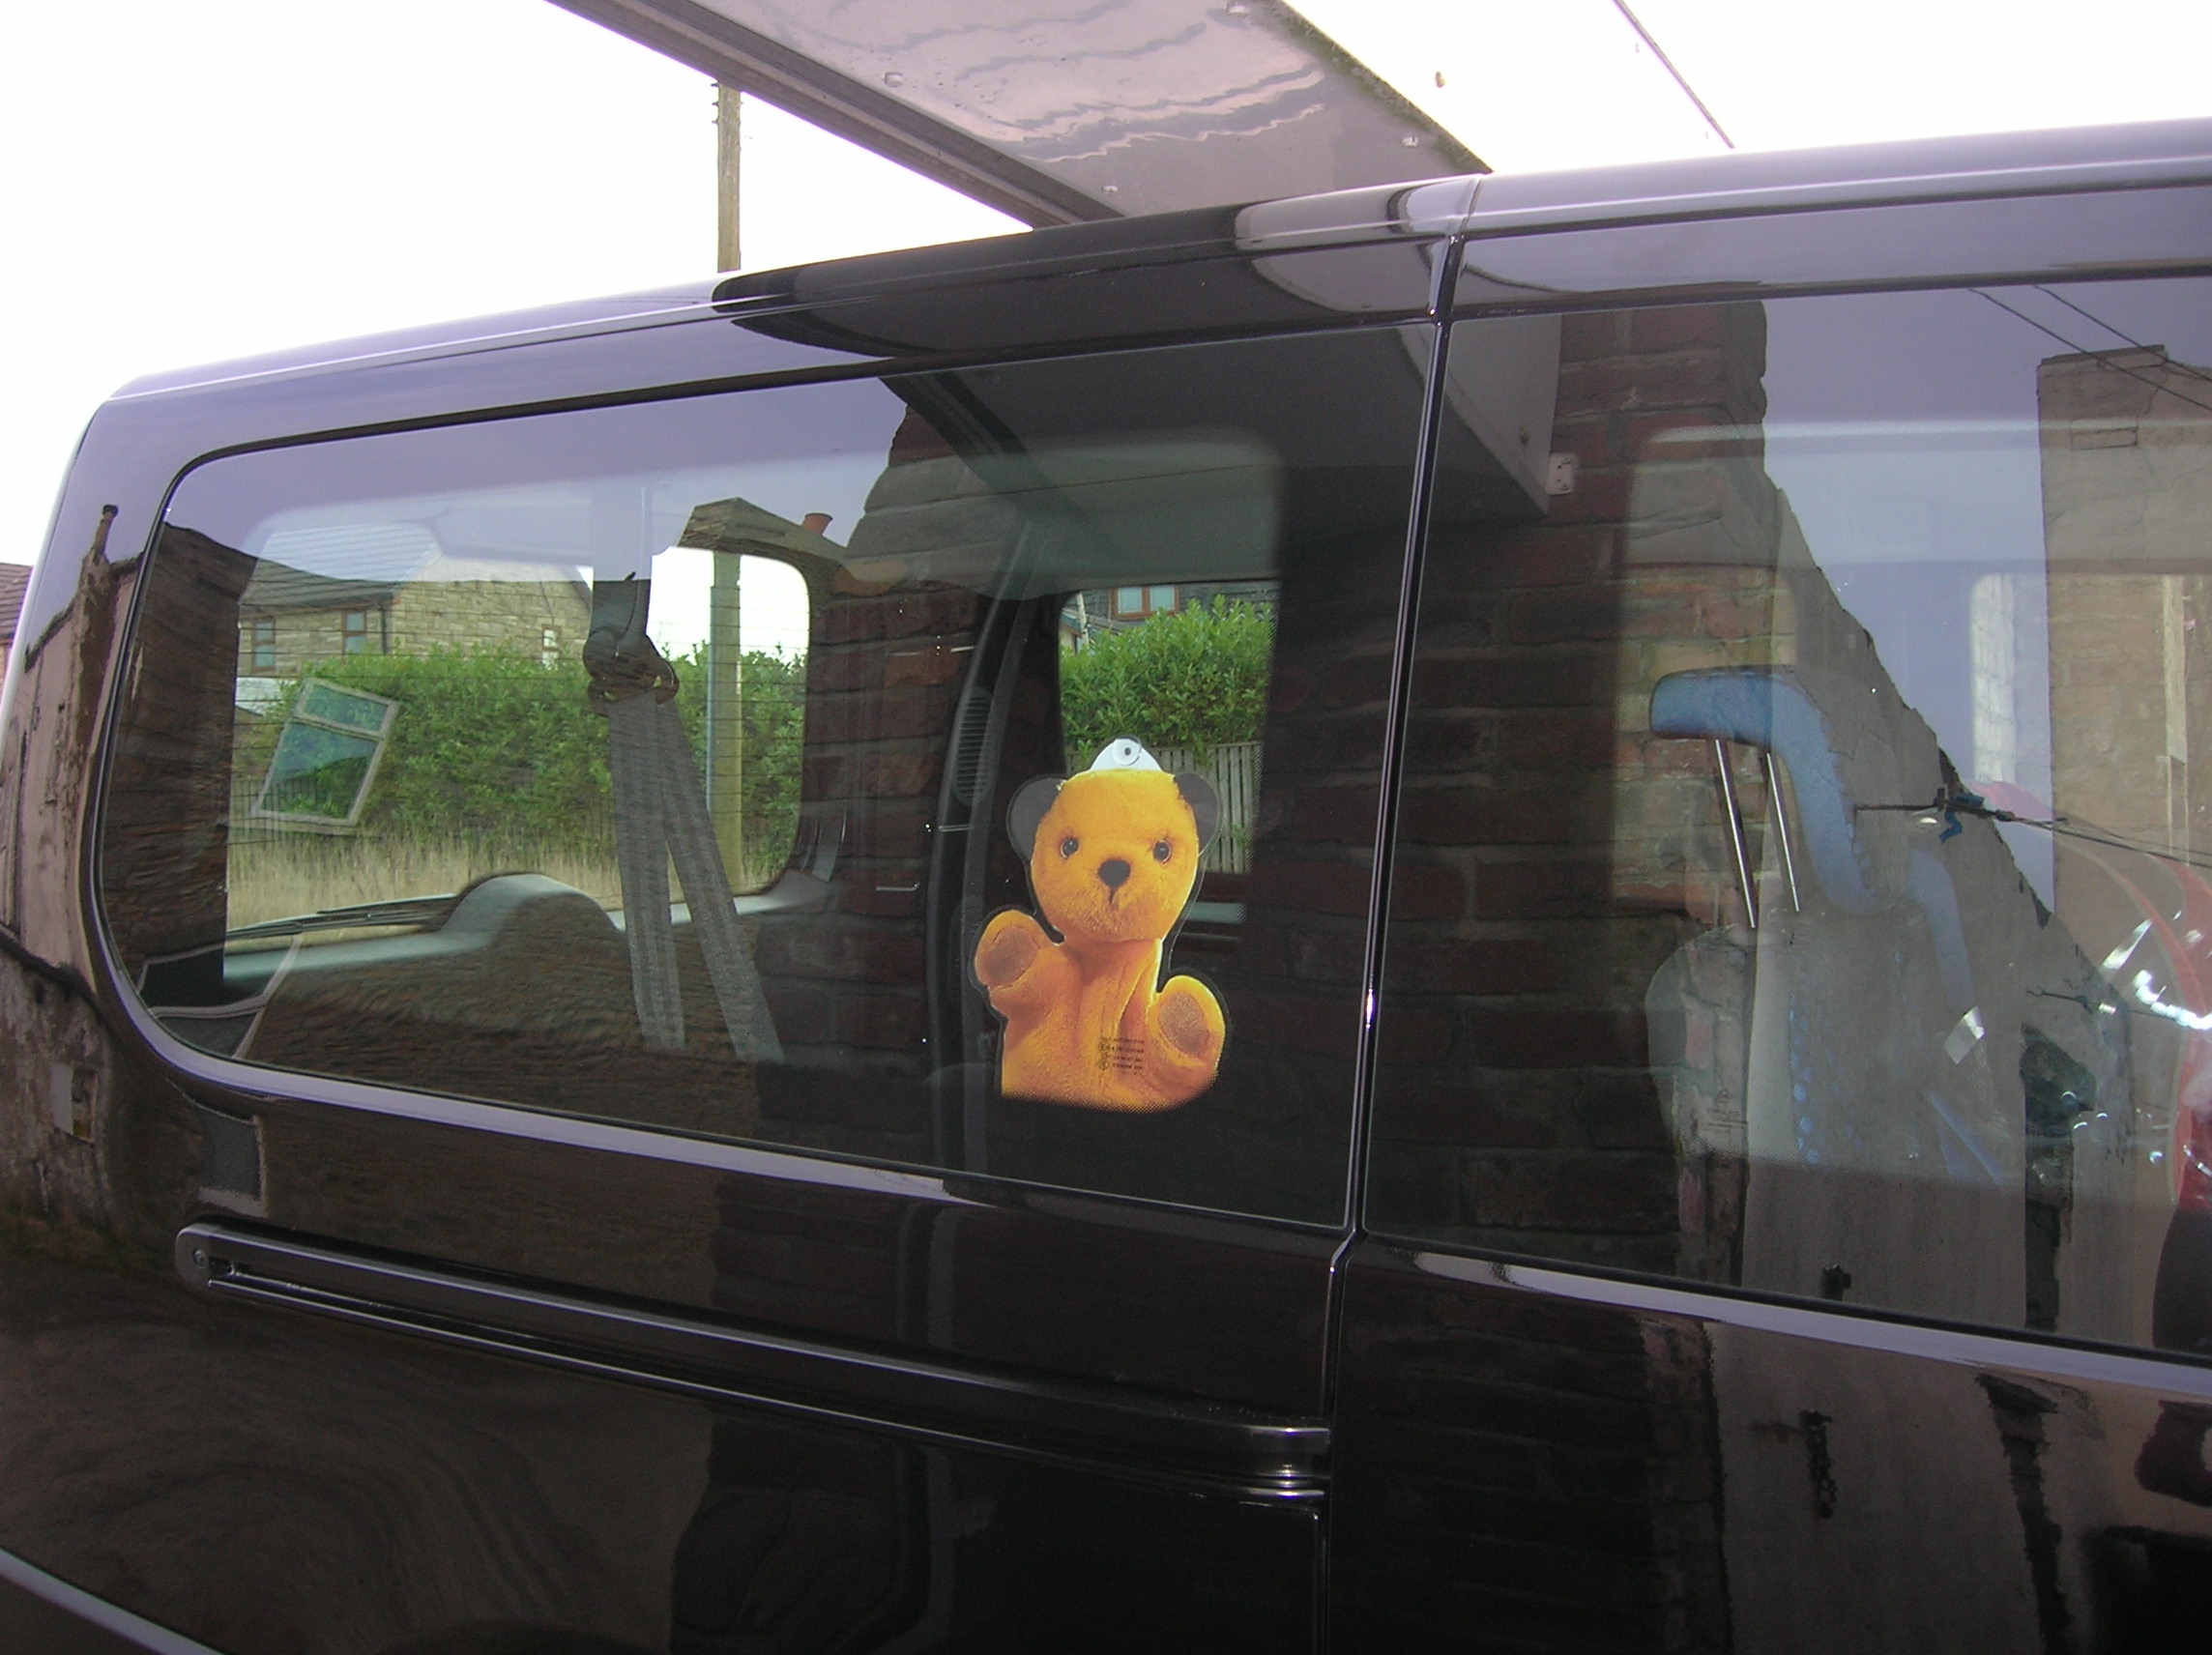 Sooty the Scudo